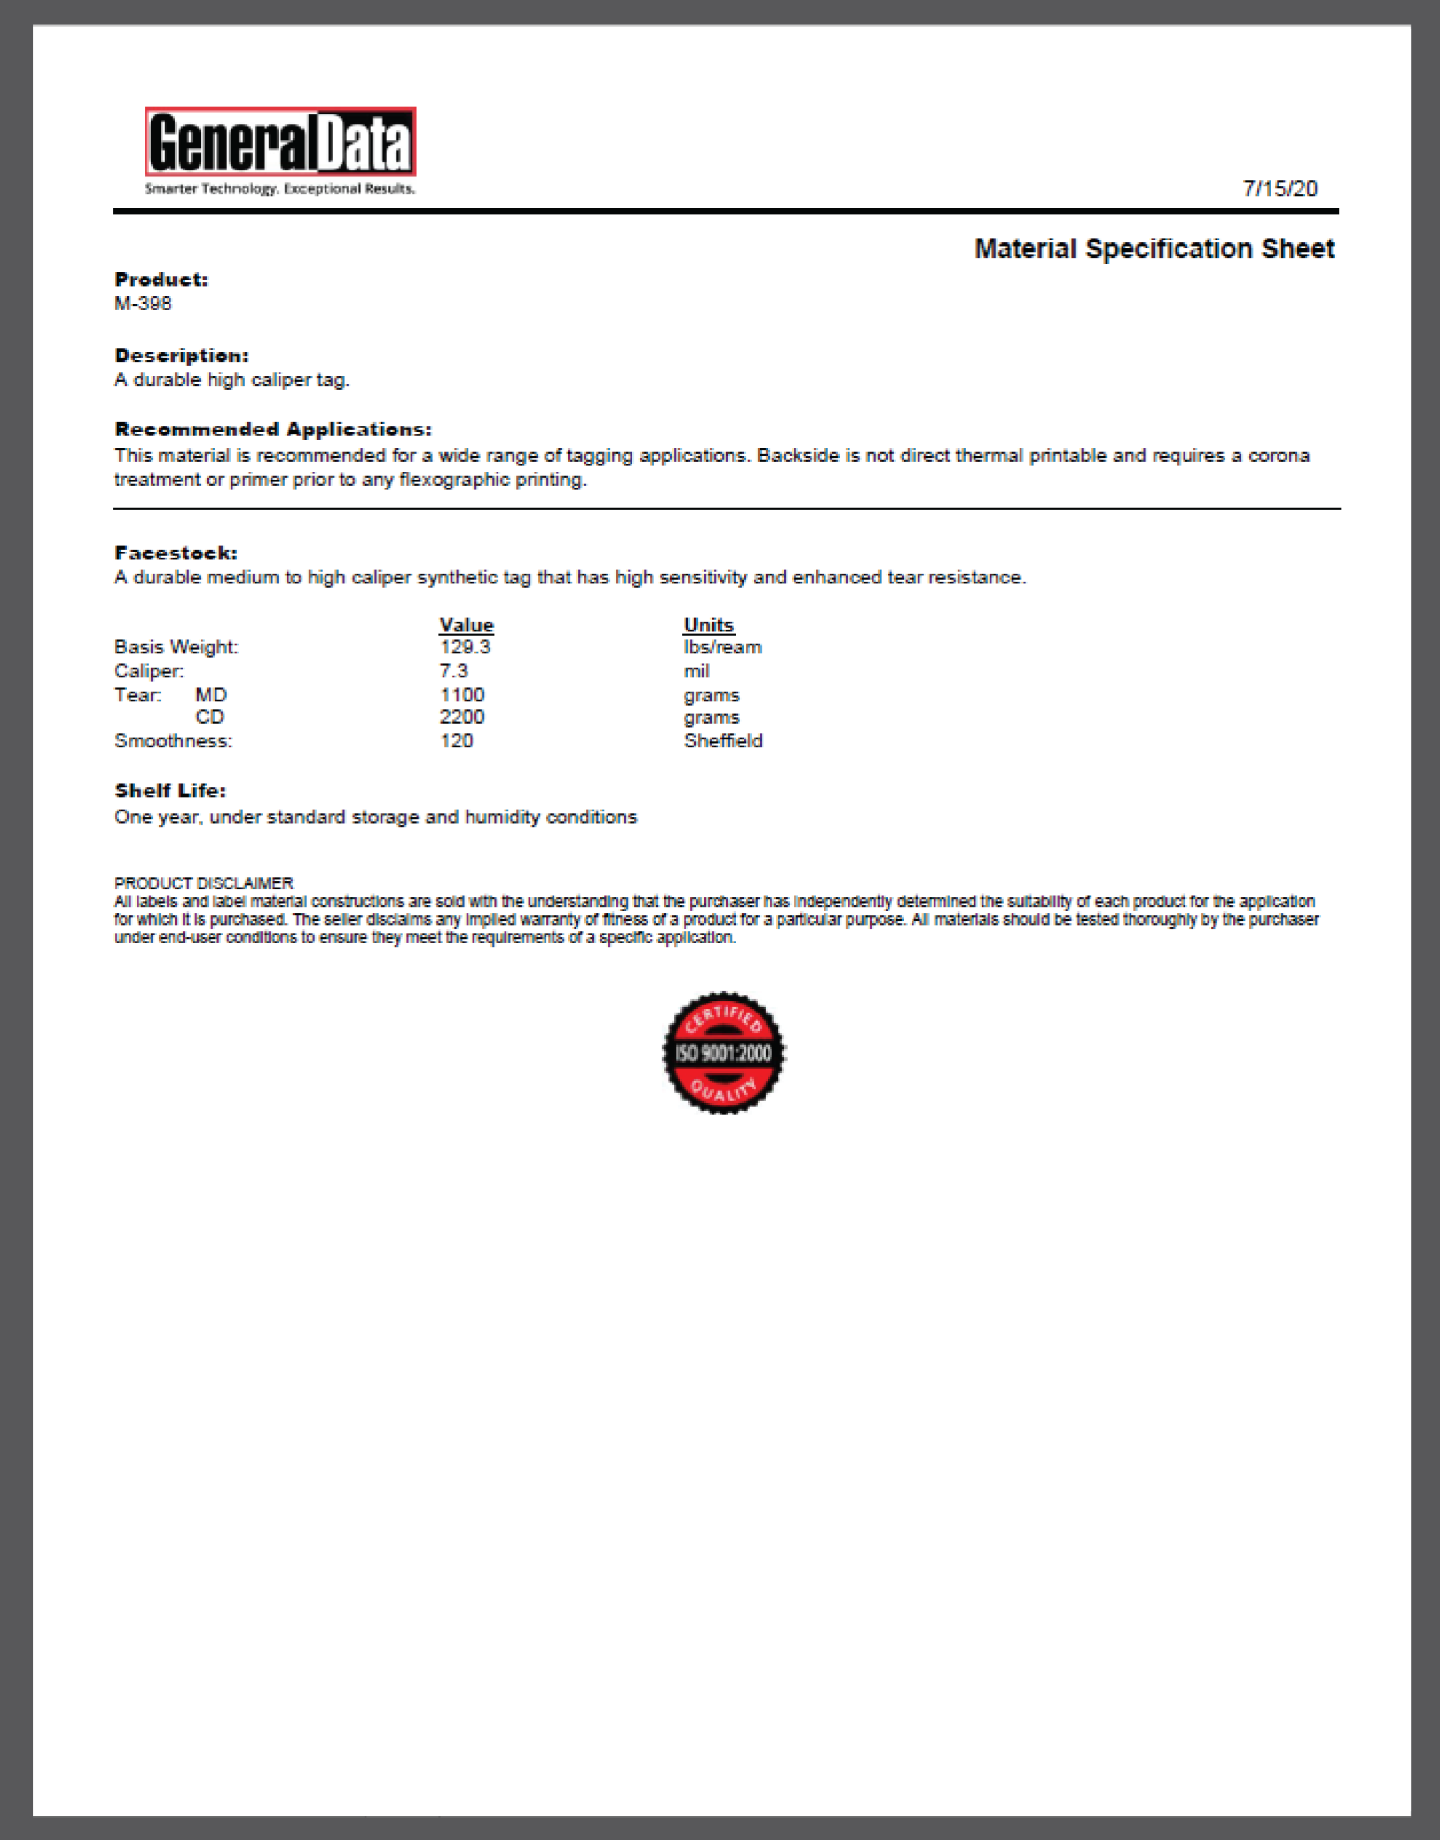 M-398 Material Specification Sheet